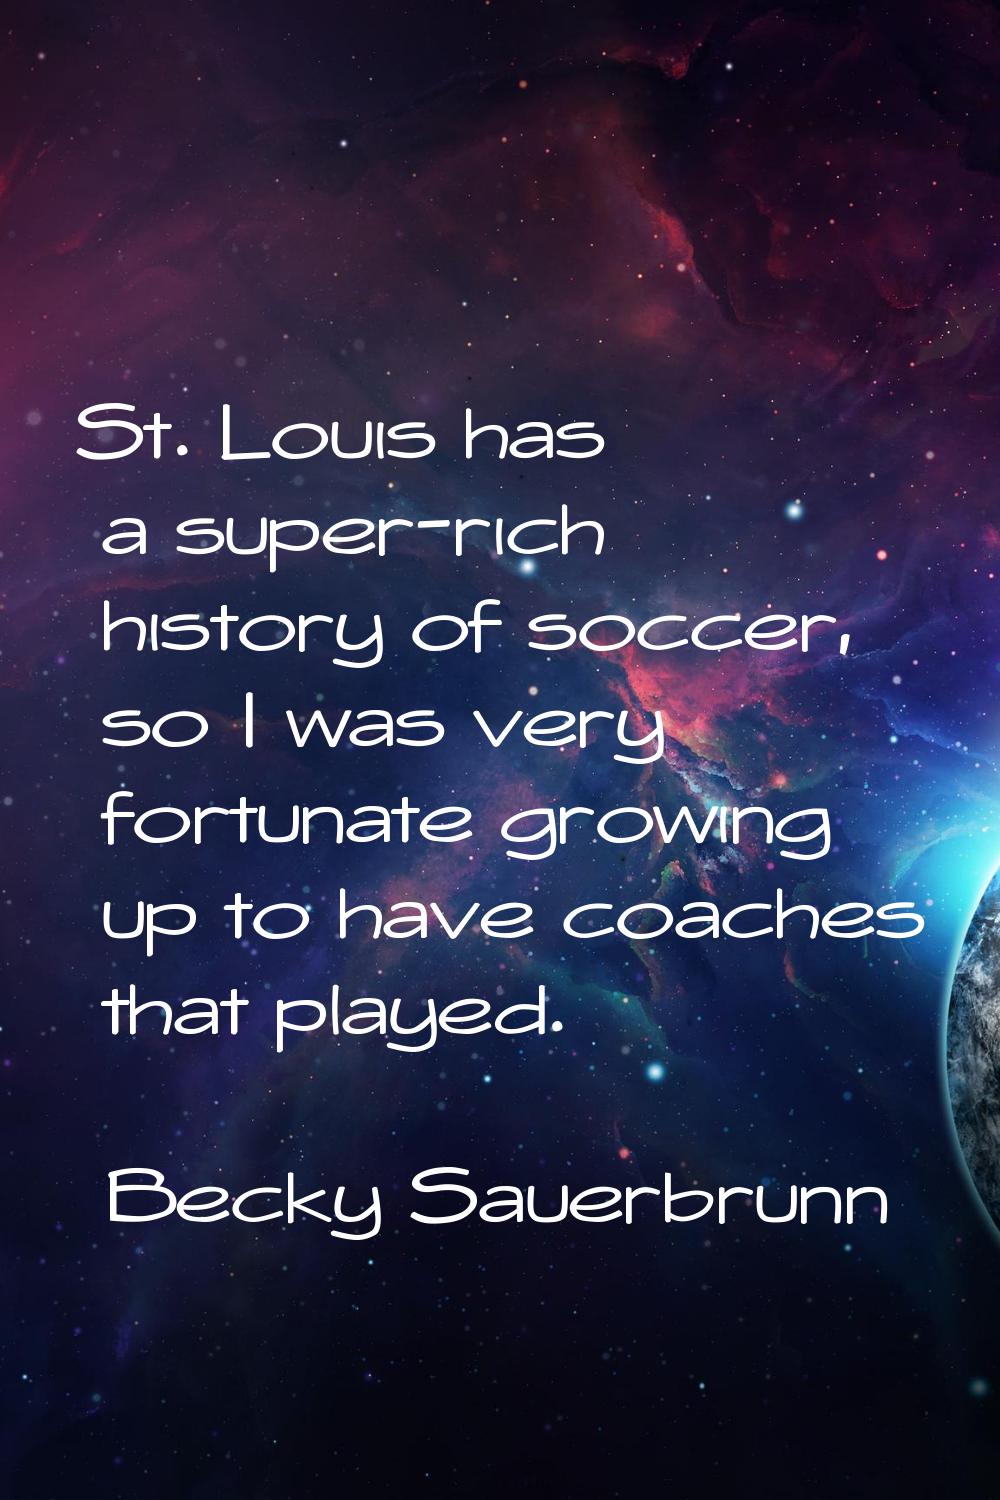 St. Louis has a super-rich history of soccer, so I was very fortunate growing up to have coaches th